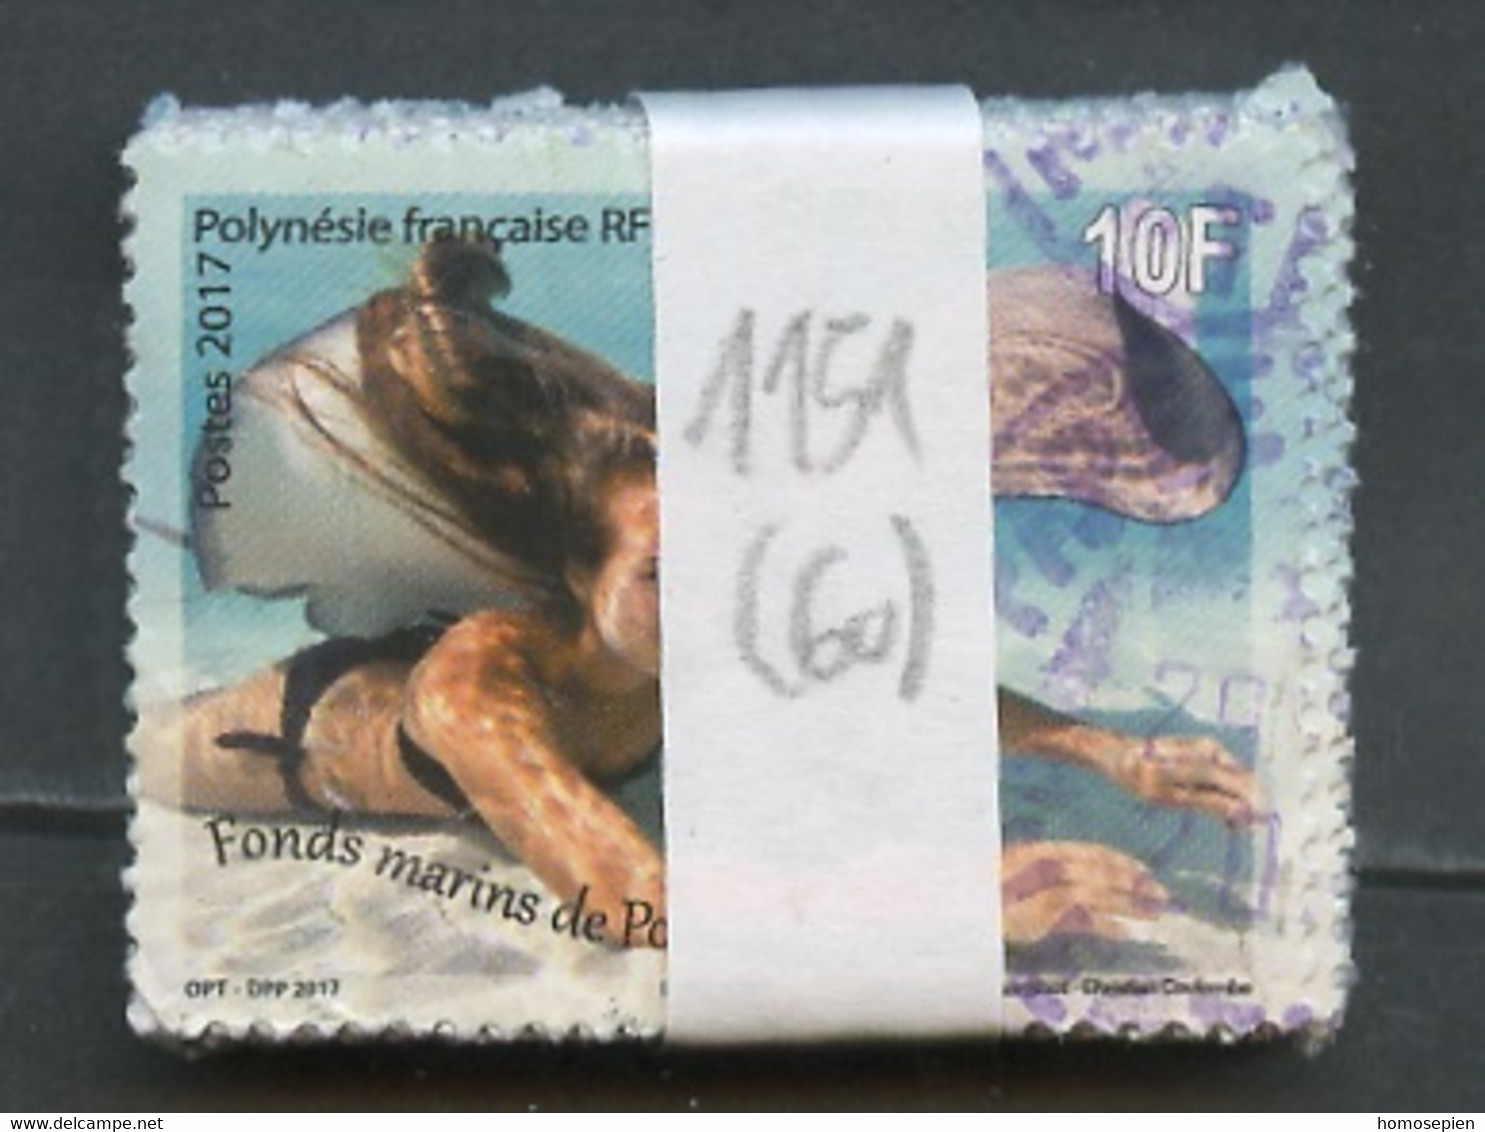 Polynésie Française - Polynesien - Polynesia Lot 2017 Y&T N°1151 - Michel N°(?) (o) - Lot De 60 Timbres - Used Stamps